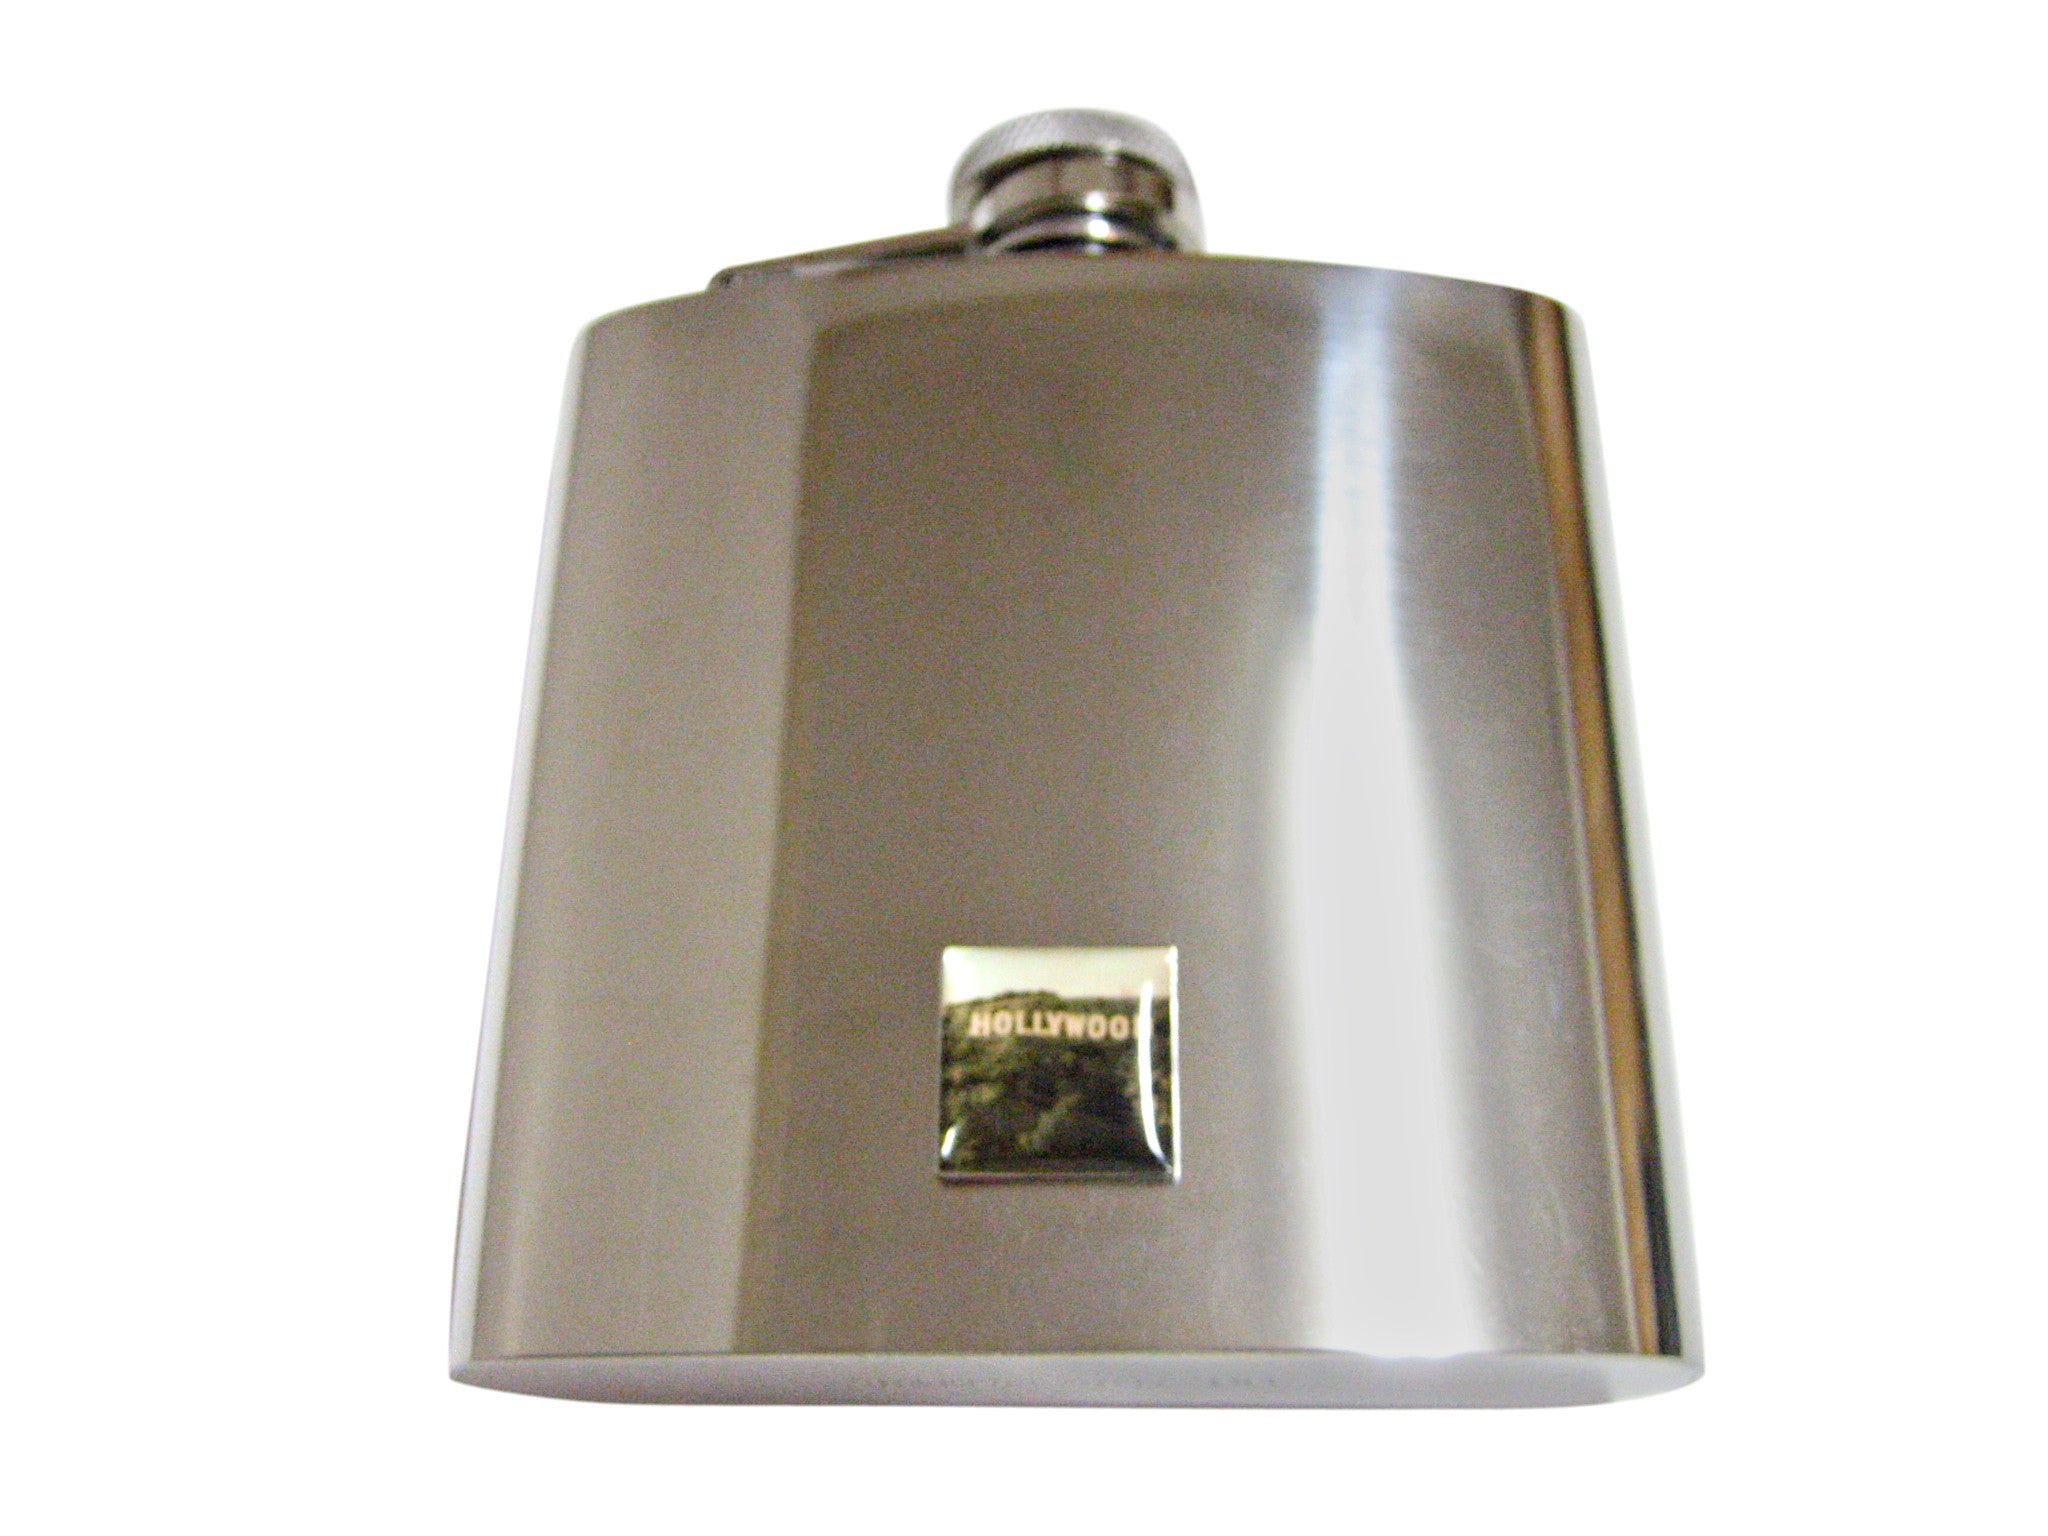 Hollywood Sign 6 Oz. Stainless Steel Flask